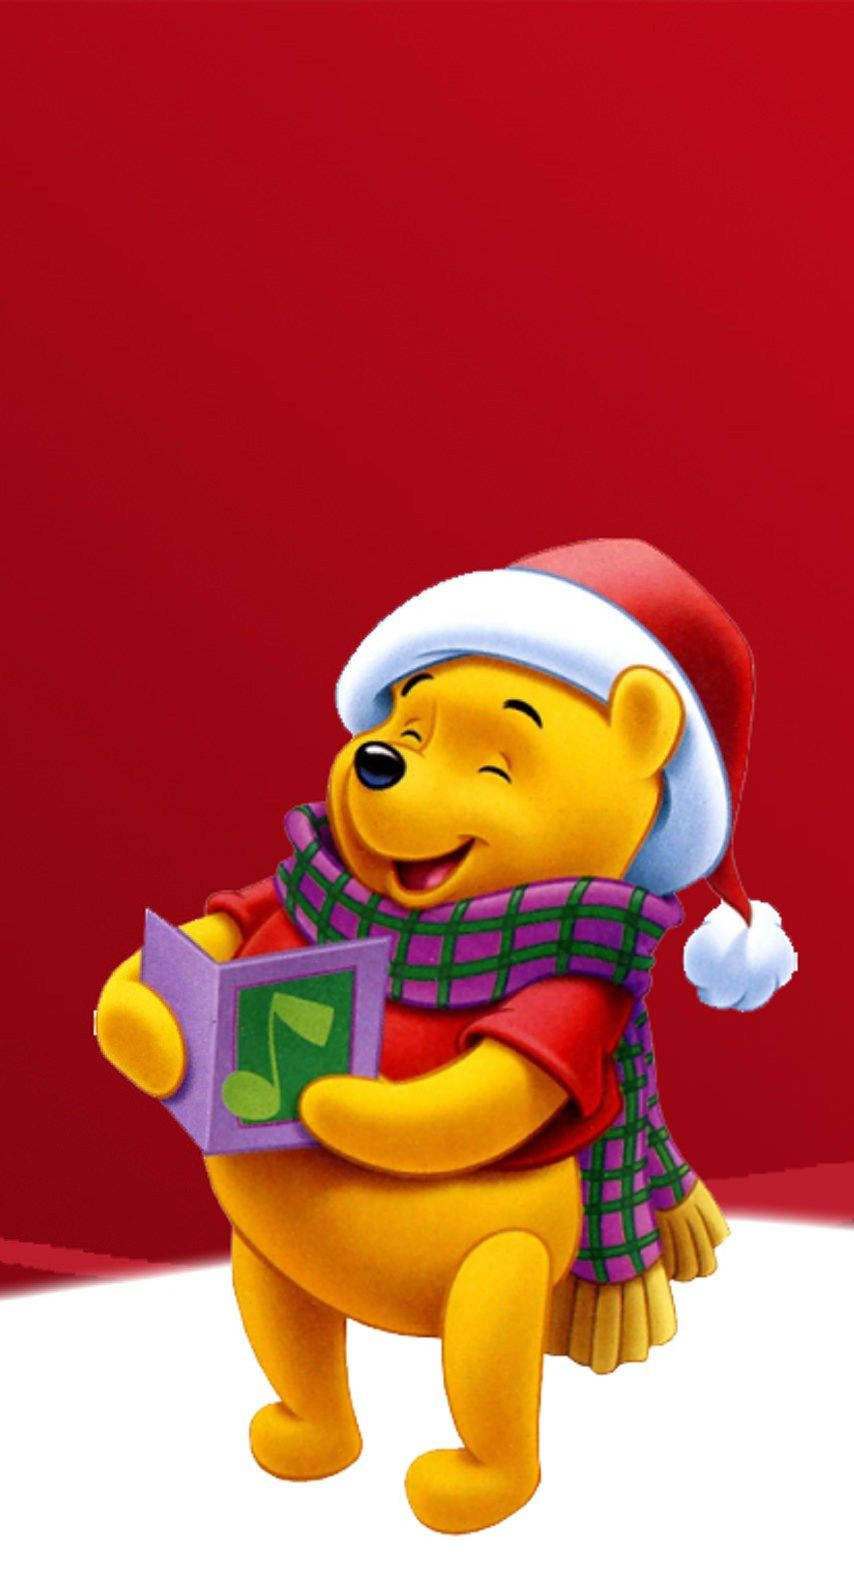 Download Winnie The Pooh Christmas Phone Wallpaper